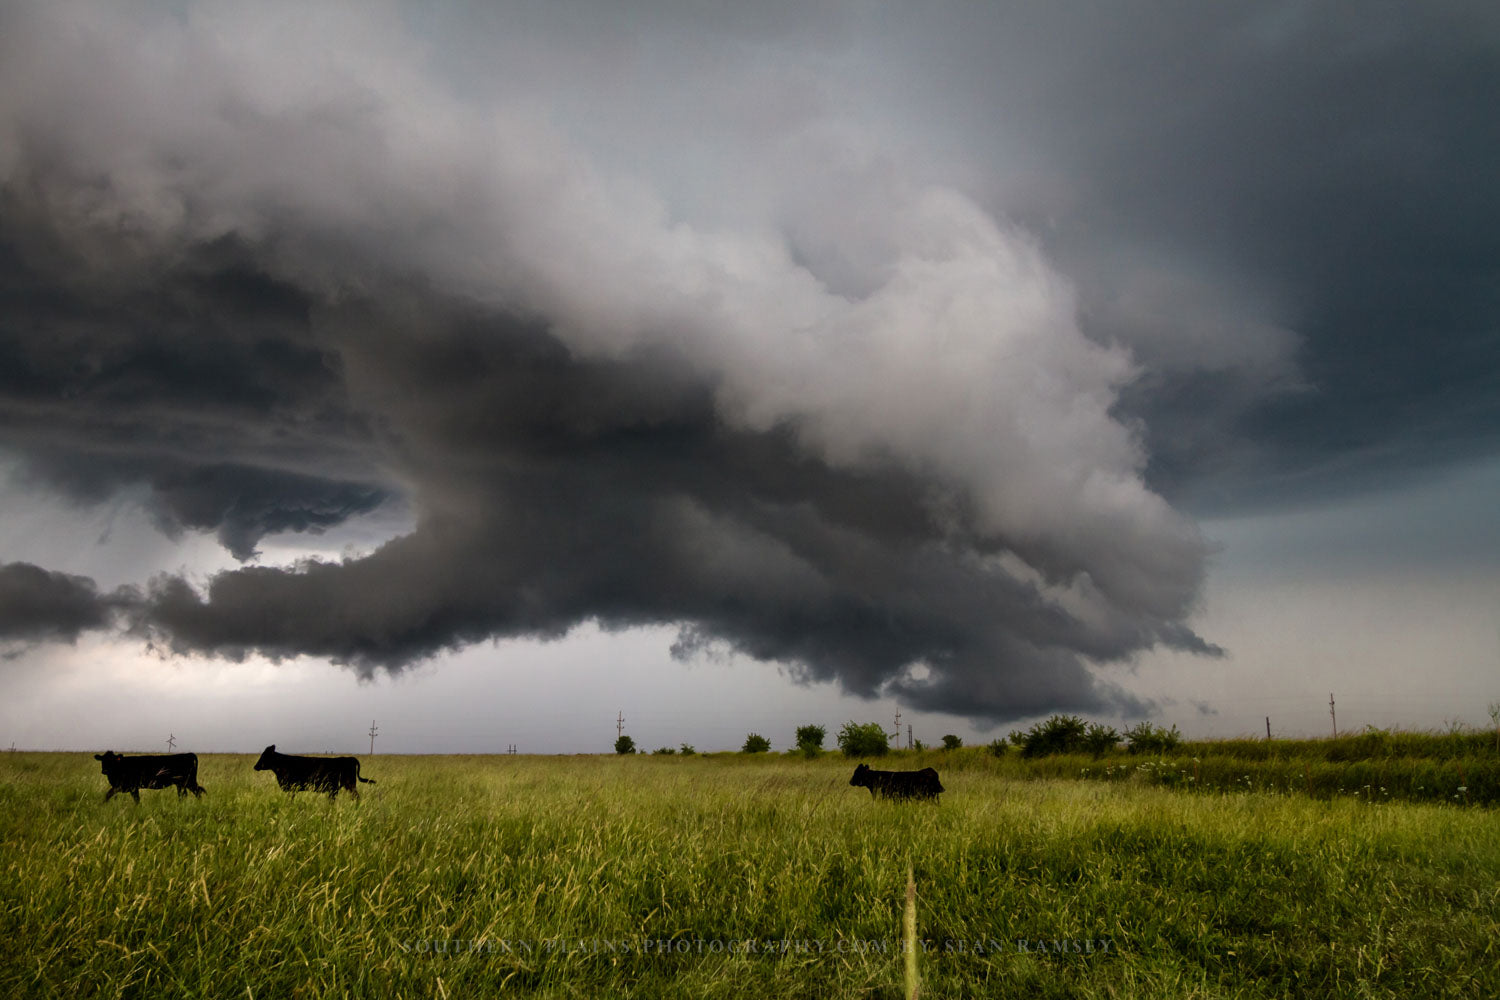 Storm photography print of cattle moving away from a severe thunderstorm on an autumn day in Kansas by Sean Ramsey of Southern Plains Photography.